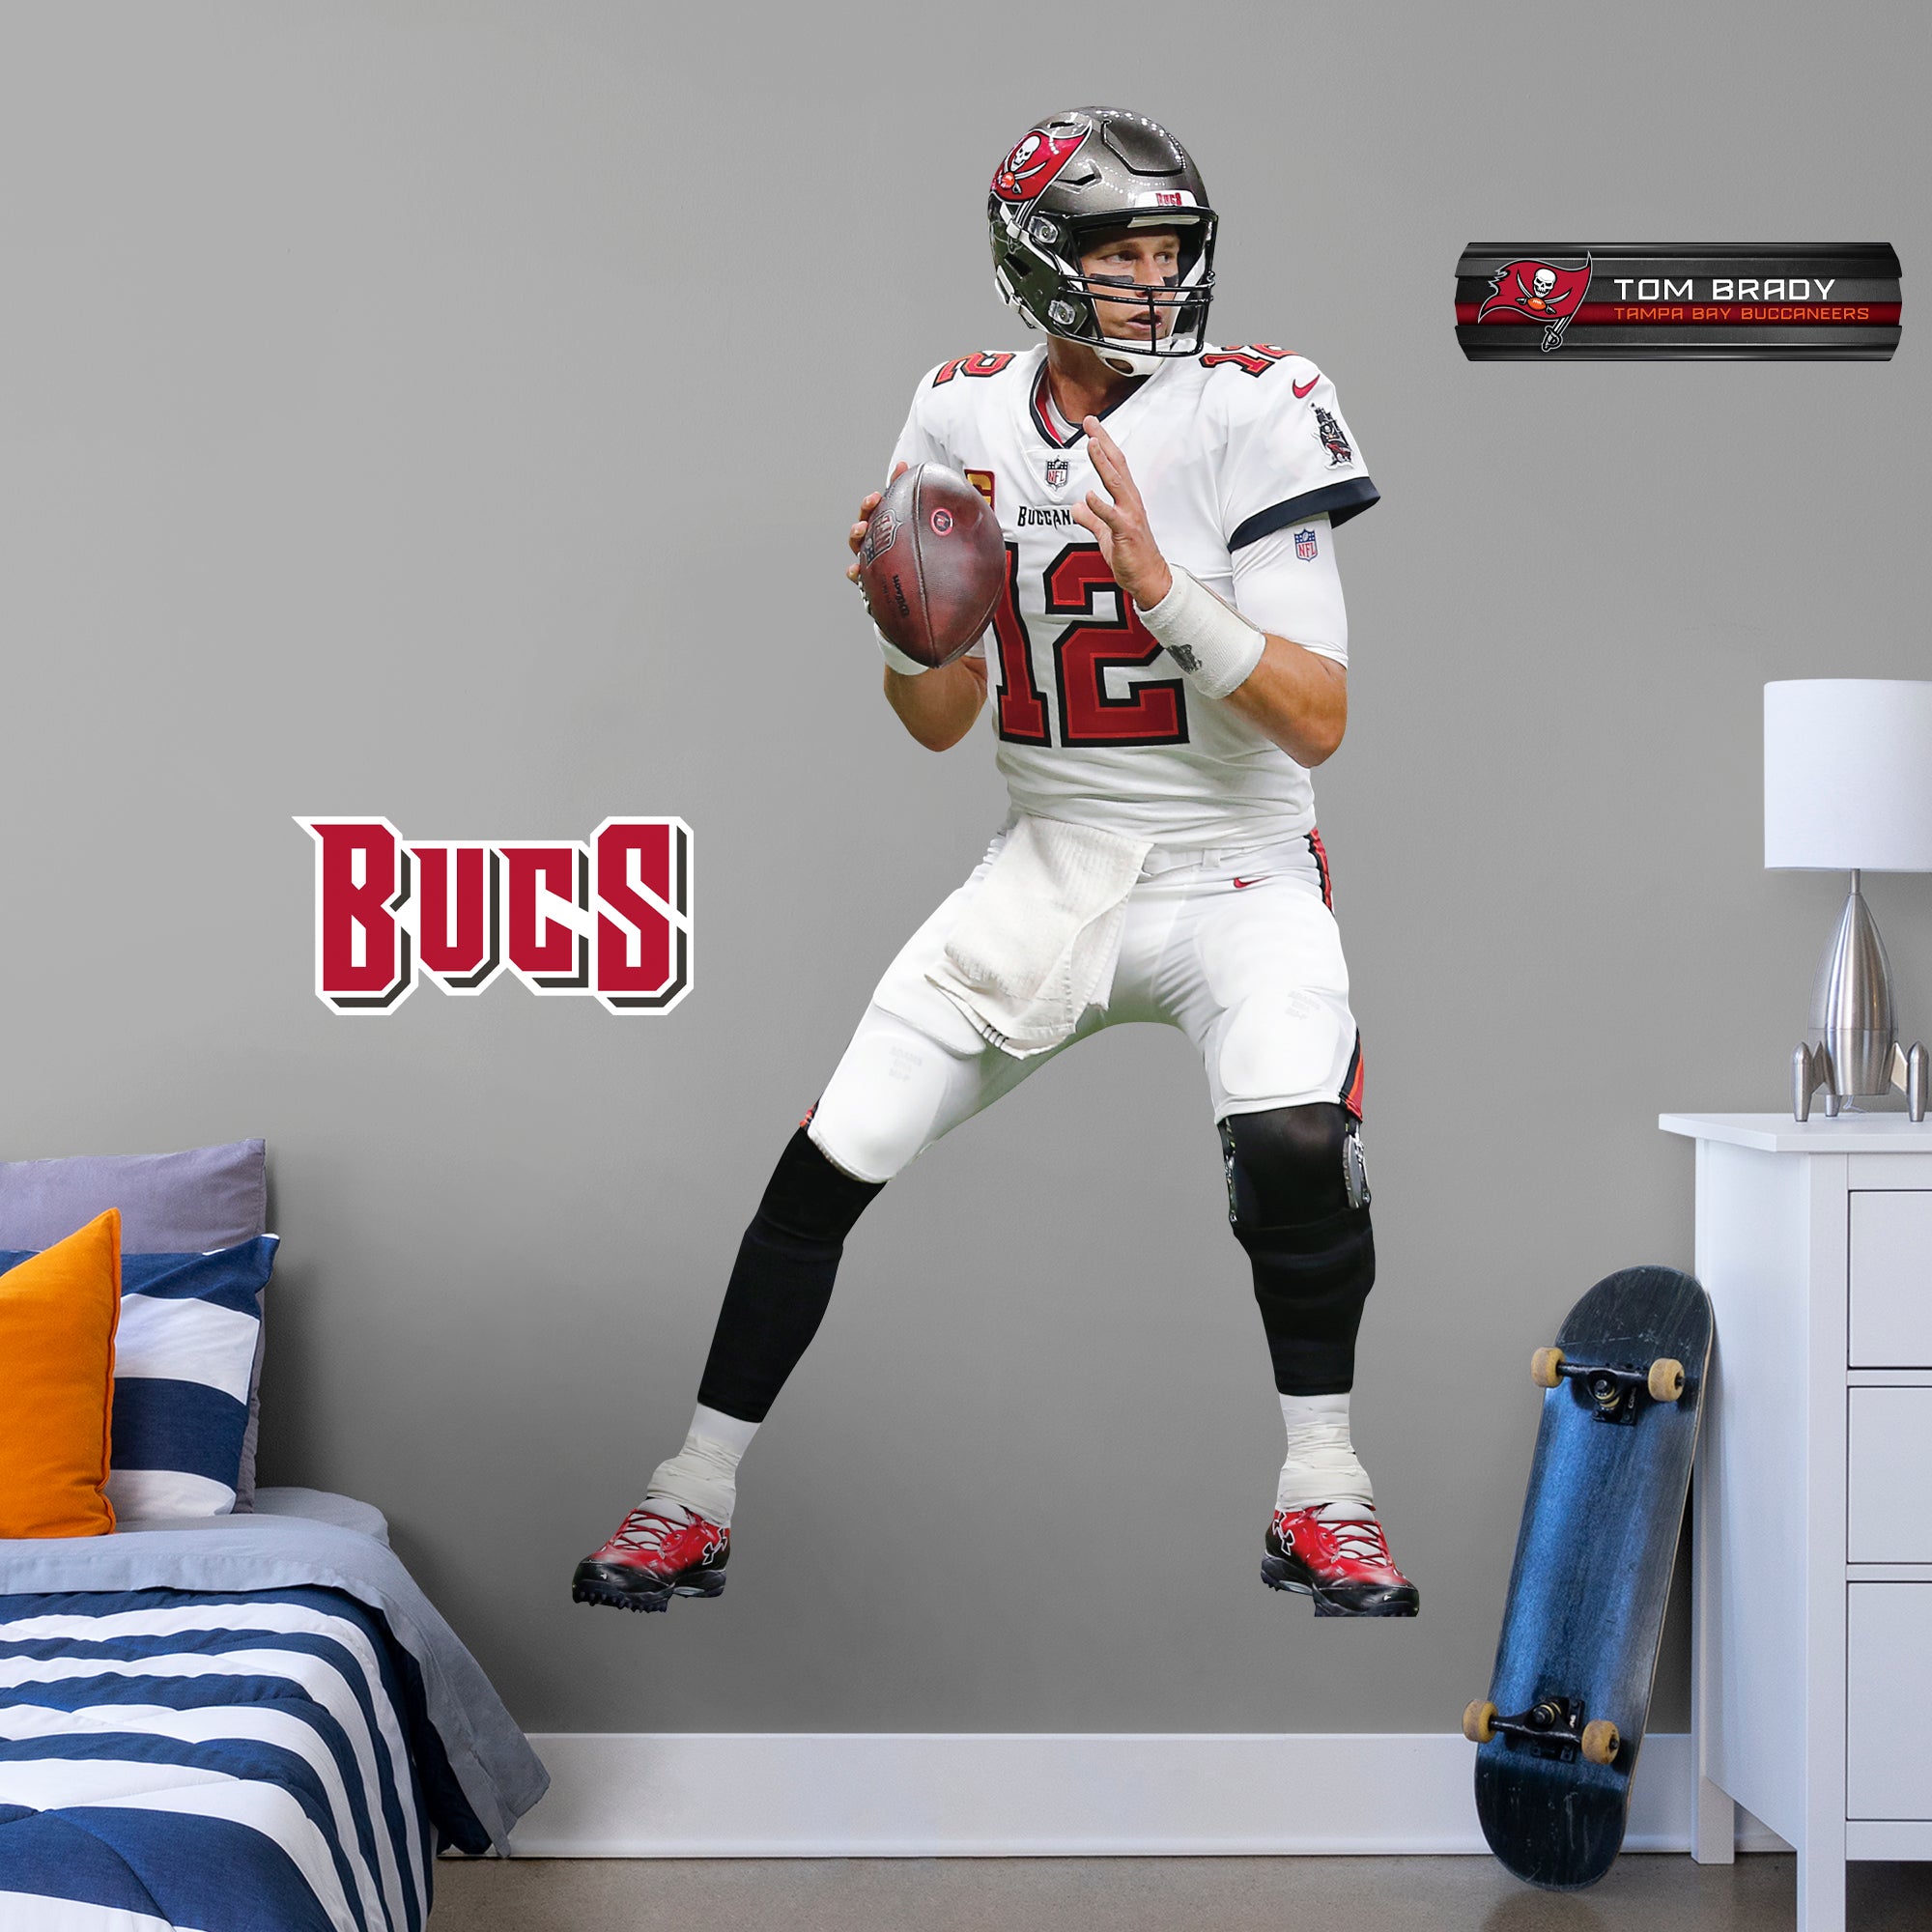 Tom Brady: Officially Licensed NFL Removable Wall Decal Life-Size Athlete + 2 Decals (48"W x 78"H) by Fathead | Vinyl